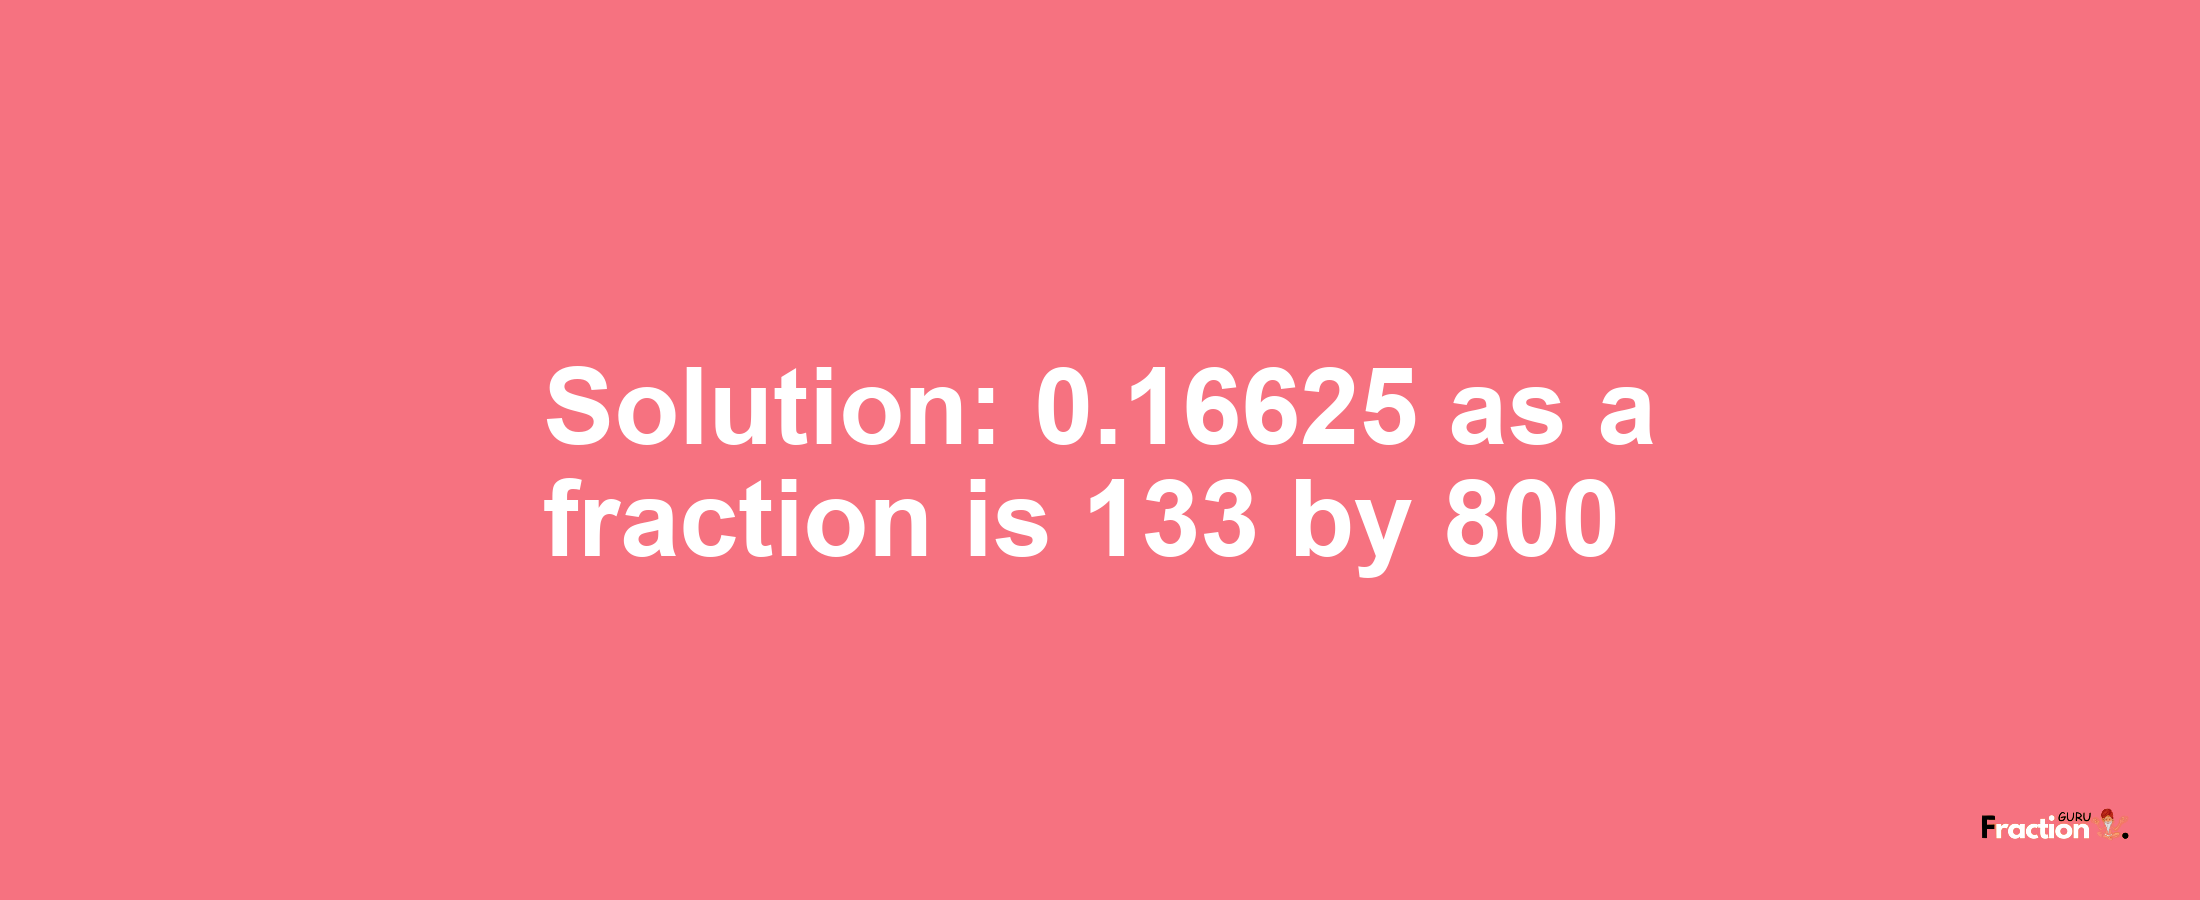 Solution:0.16625 as a fraction is 133/800